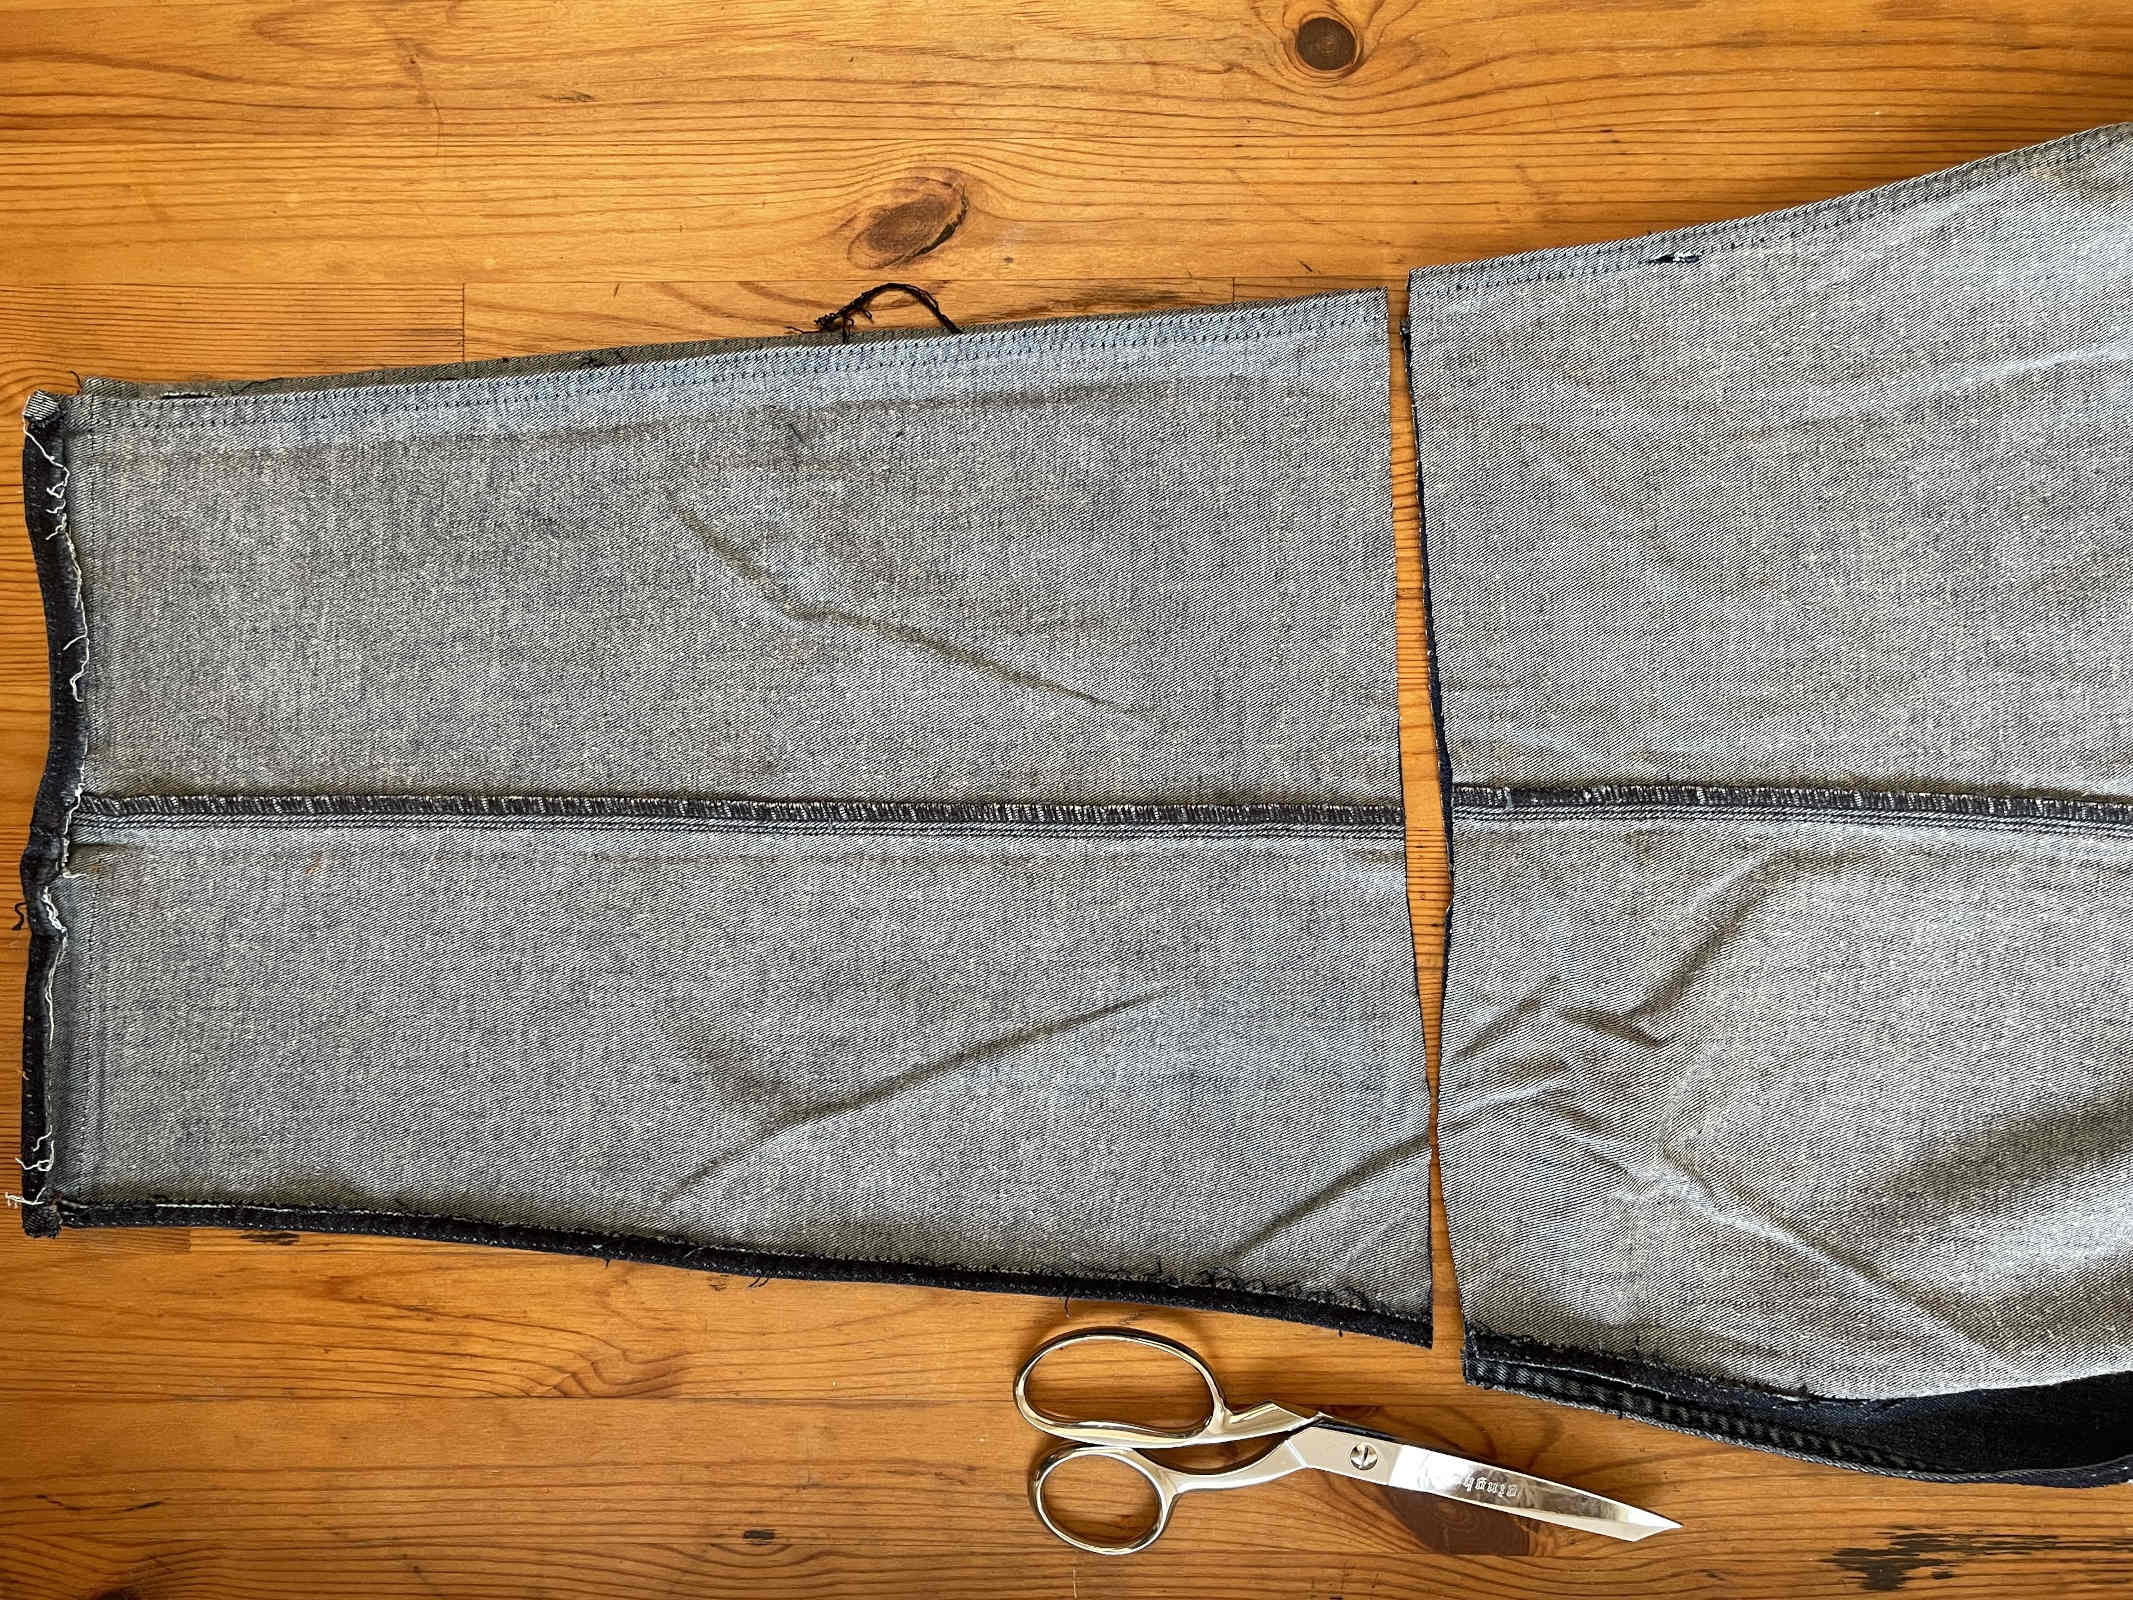 Cut jean legs sit on a wooden background with a pair of silver sewing shears